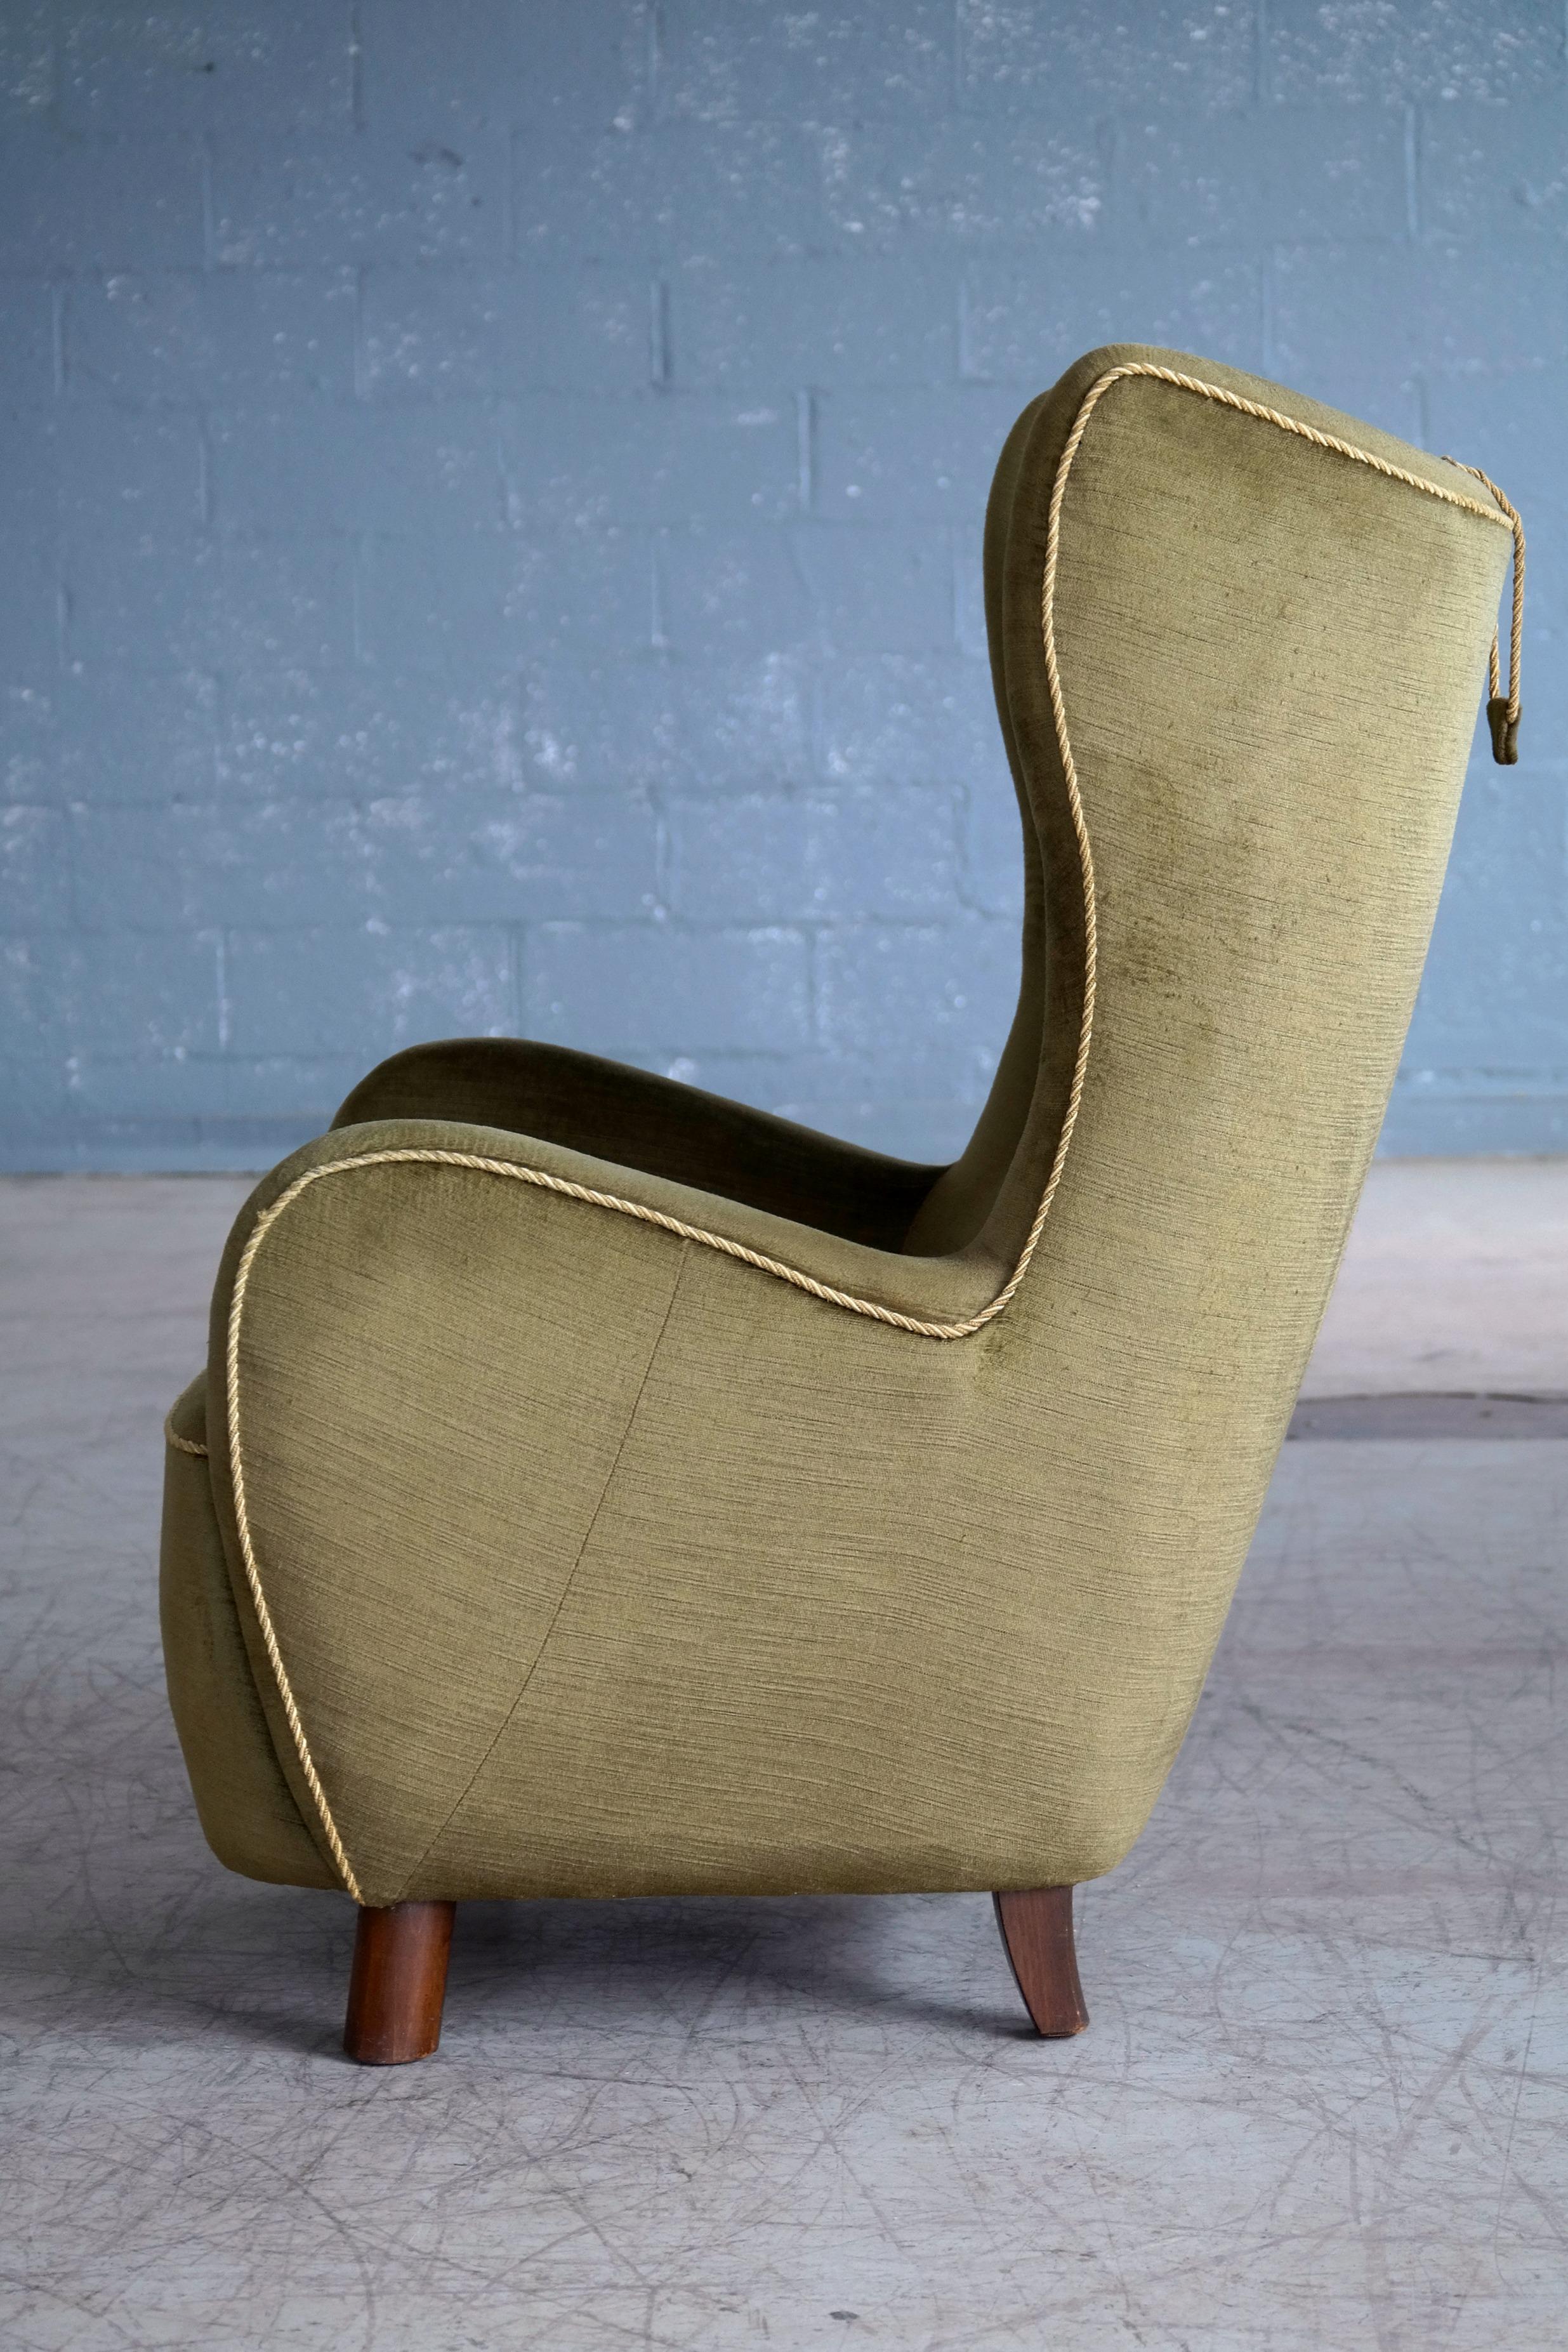 Danish 1940s Flemming Lassen Attributed High Back Lounge Chair 1